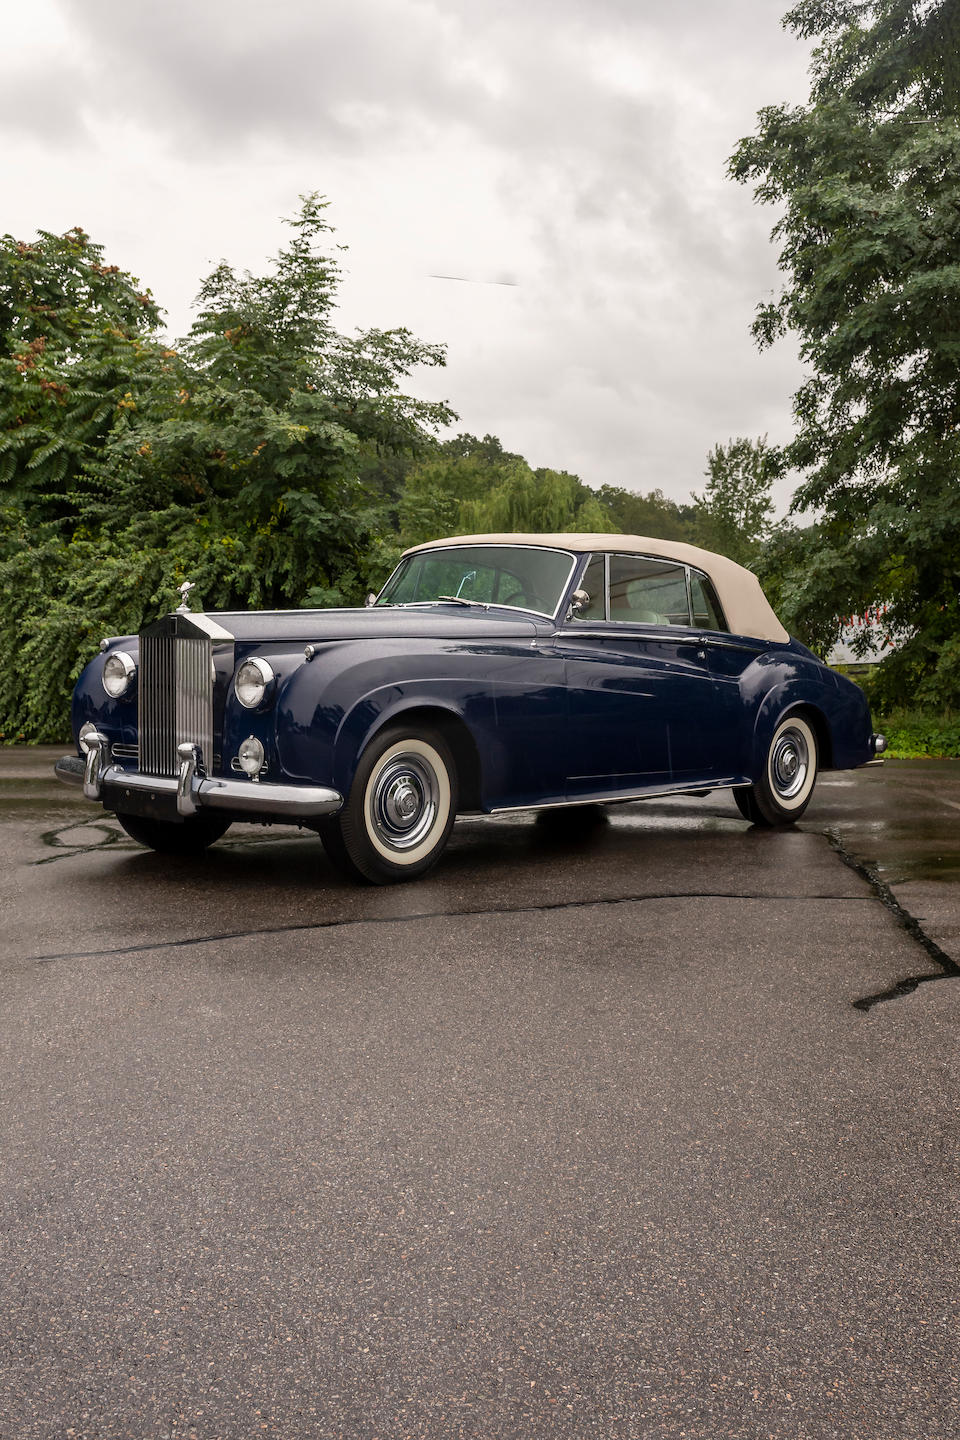 <i>Ordered new by S. Prestley Blake </i><br /><b>1959 Rolls-Royce Silver Cloud I Drophead Coup&#233;  </b><br />Chassis no. LSMH 245